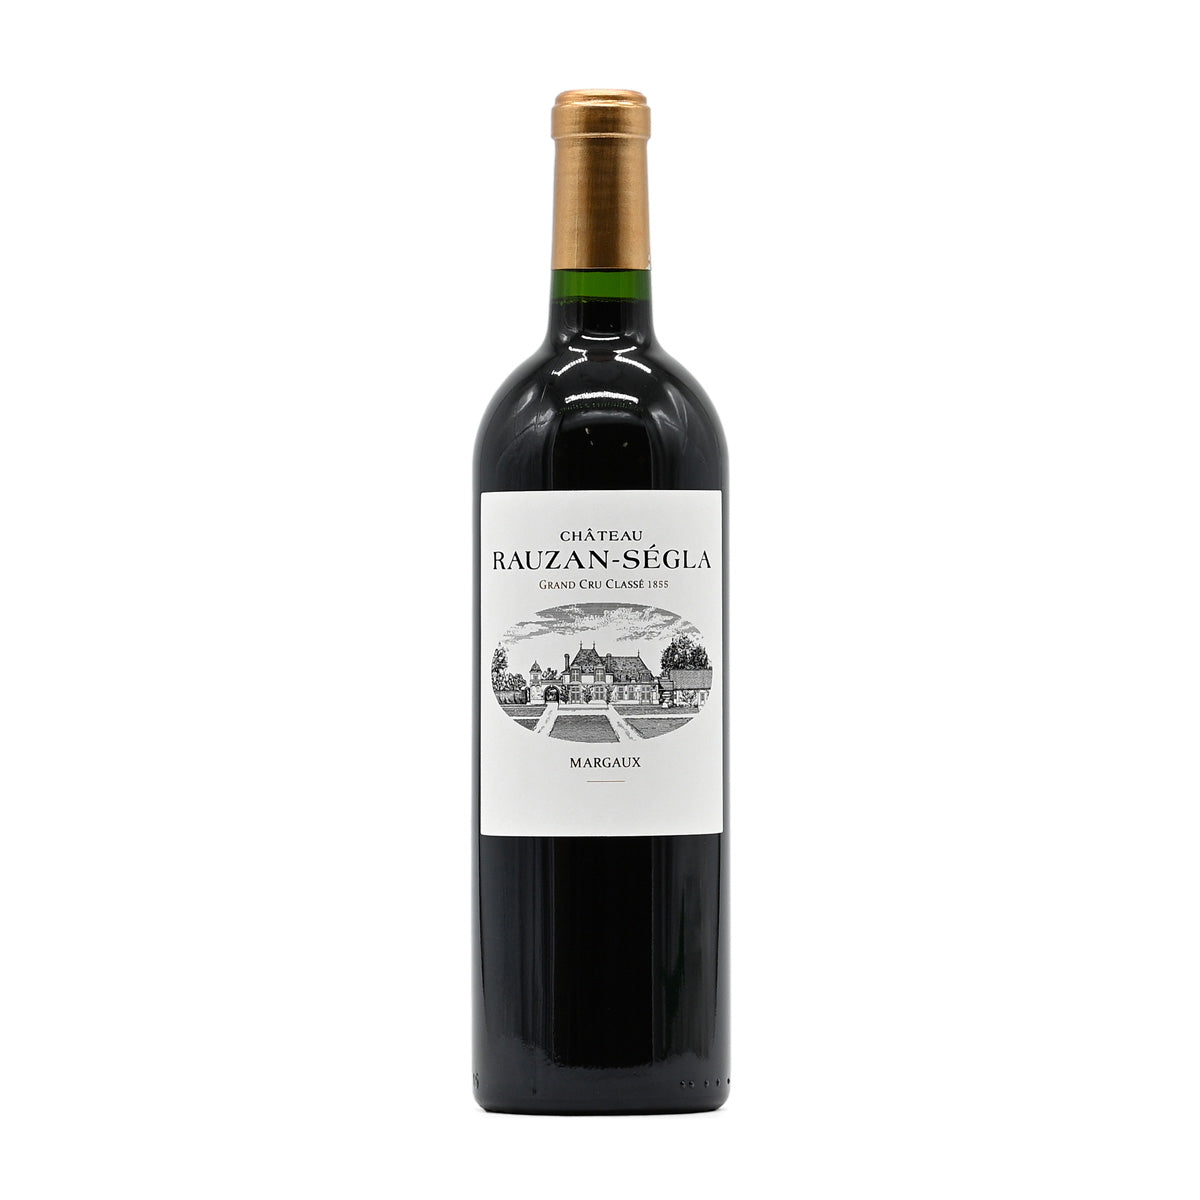 Chateau Rausan Segla 2020, 750ml French red wine, made from a blend of Cabernet Sauvignon, Merlot, and Petit Verdot ; from Margaux Second Growth - 1855 Classification, Bordeaux, France – GDV Fine Wines, Hong Kong